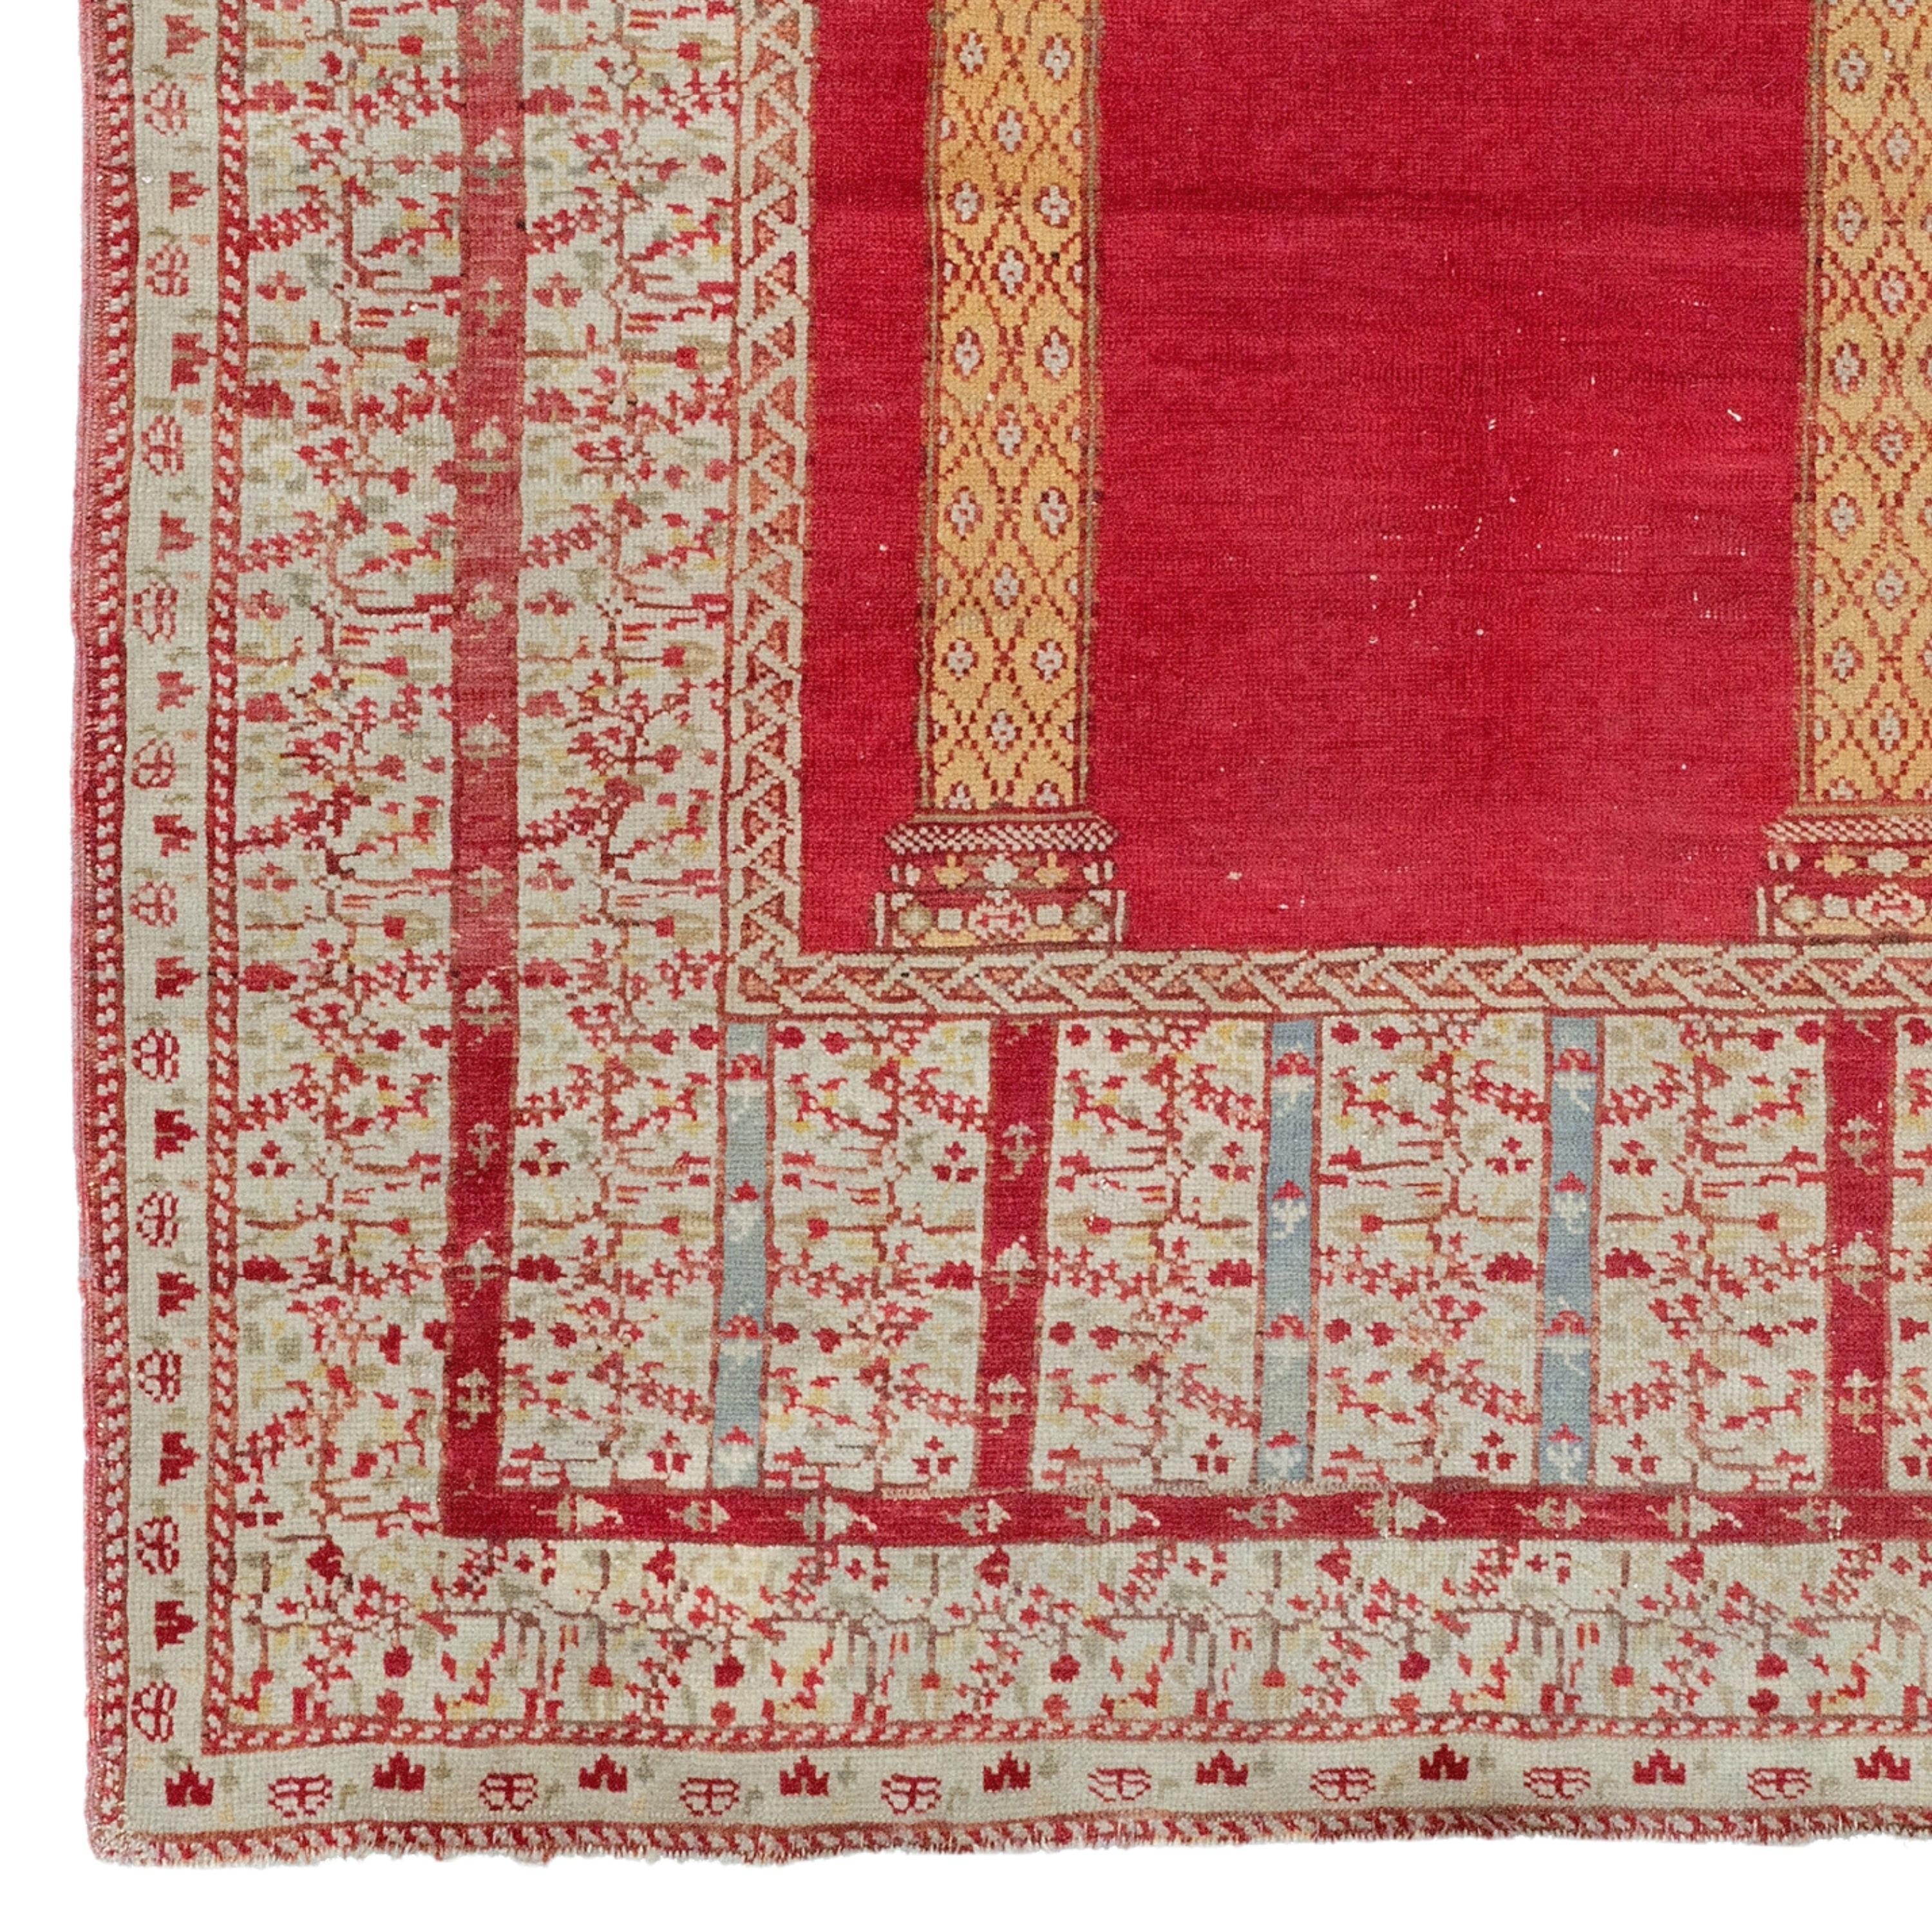 19th Century Sivas Prayer Rug

This extraordinary carpet will fascinate you with its intricate designs and vibrant colors that reflect the rich history and craftsmanship of the period. Each stitch tells the story of skilled craftsmen who masterfully